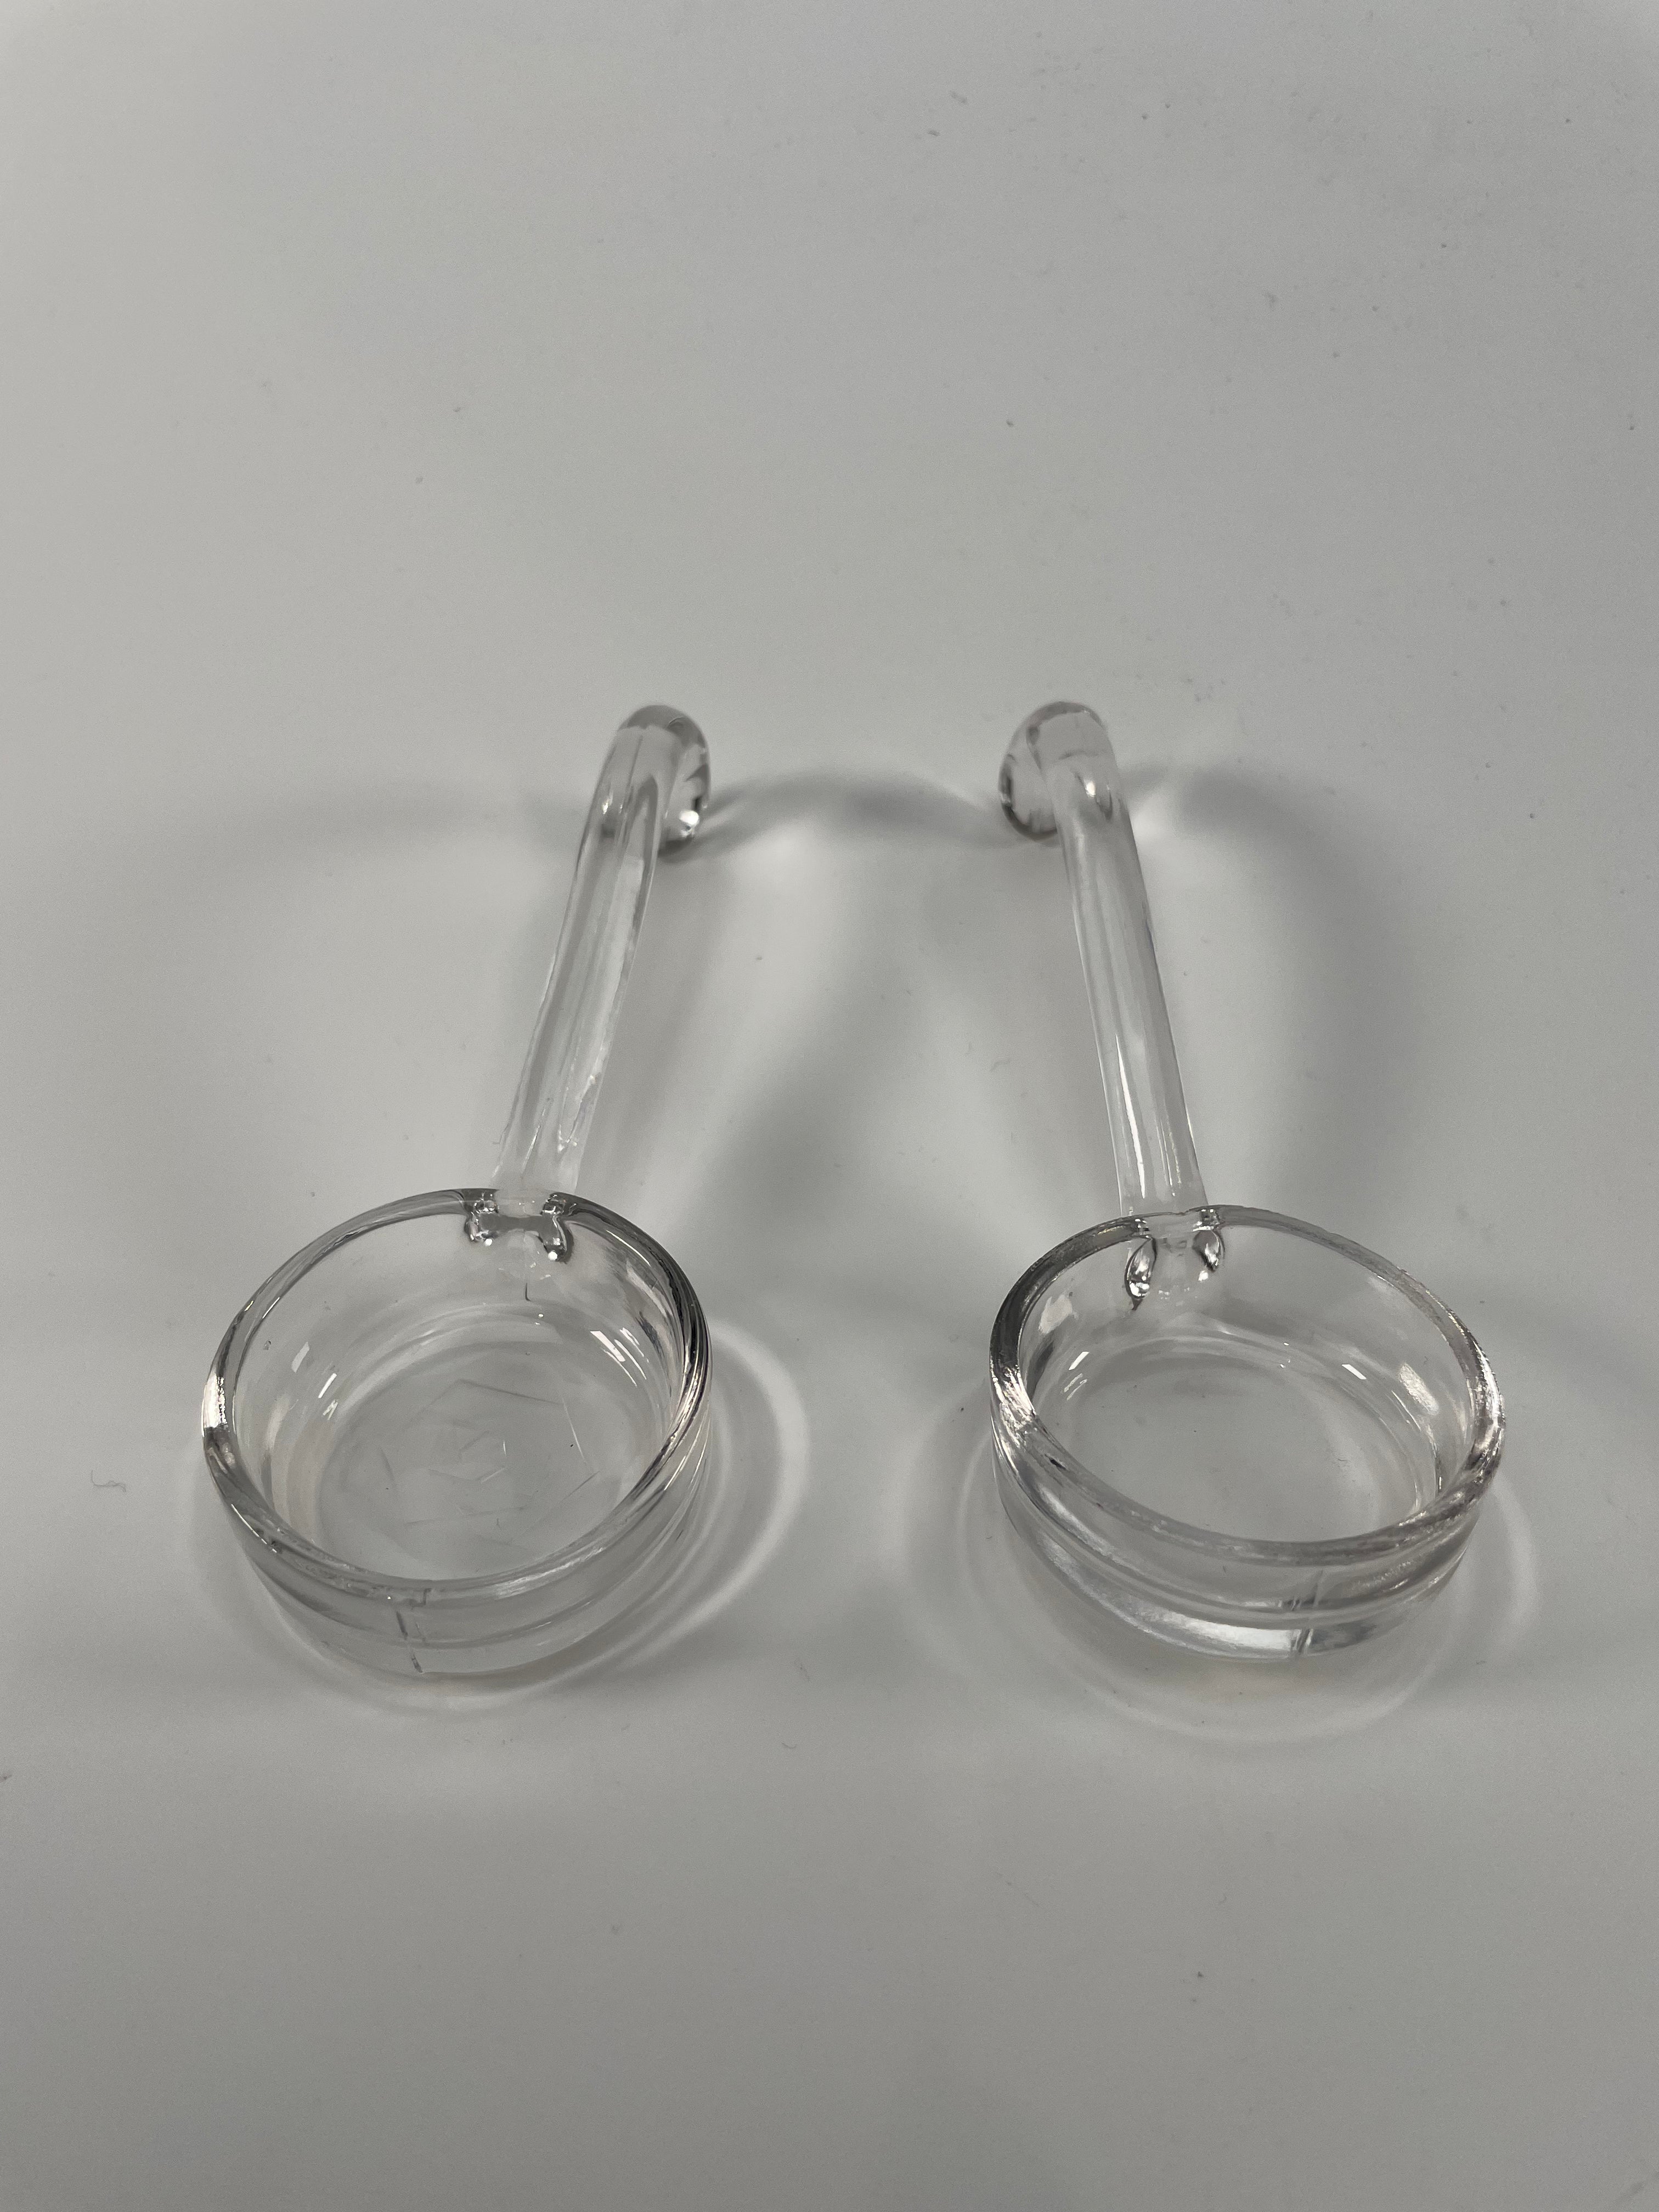 Two Glass Ladles (1930s)